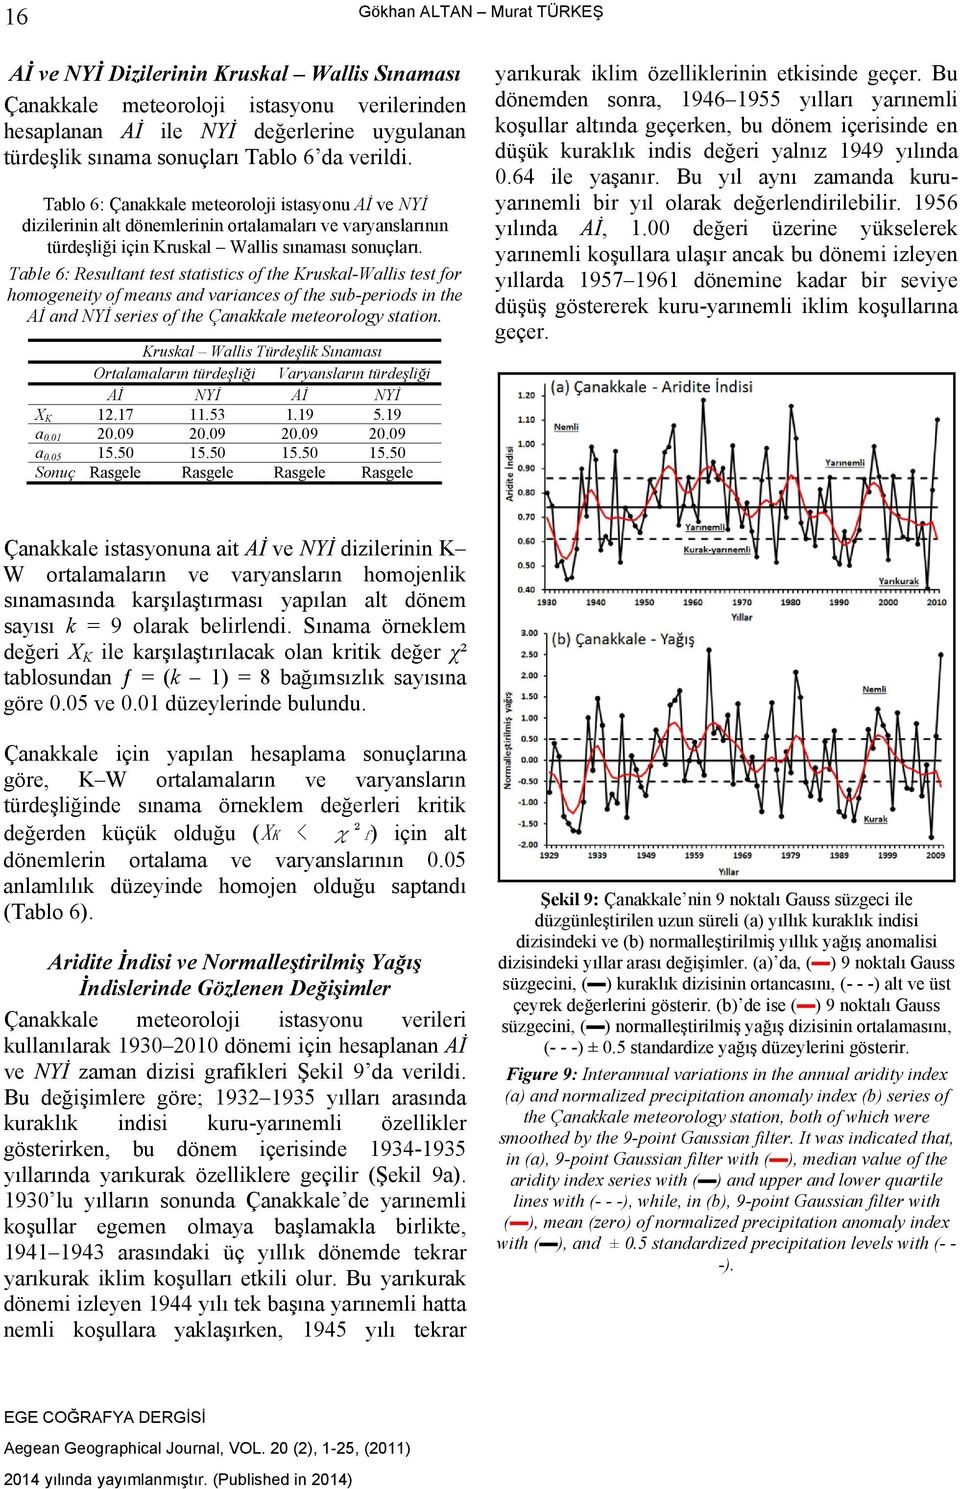 Table 6: Resultant test statistics of the Kruskal-Wallis test for homogeneity of means and variances of the sub-periods in the Aİ and NYİ series of the Çanakkale meteorology station.